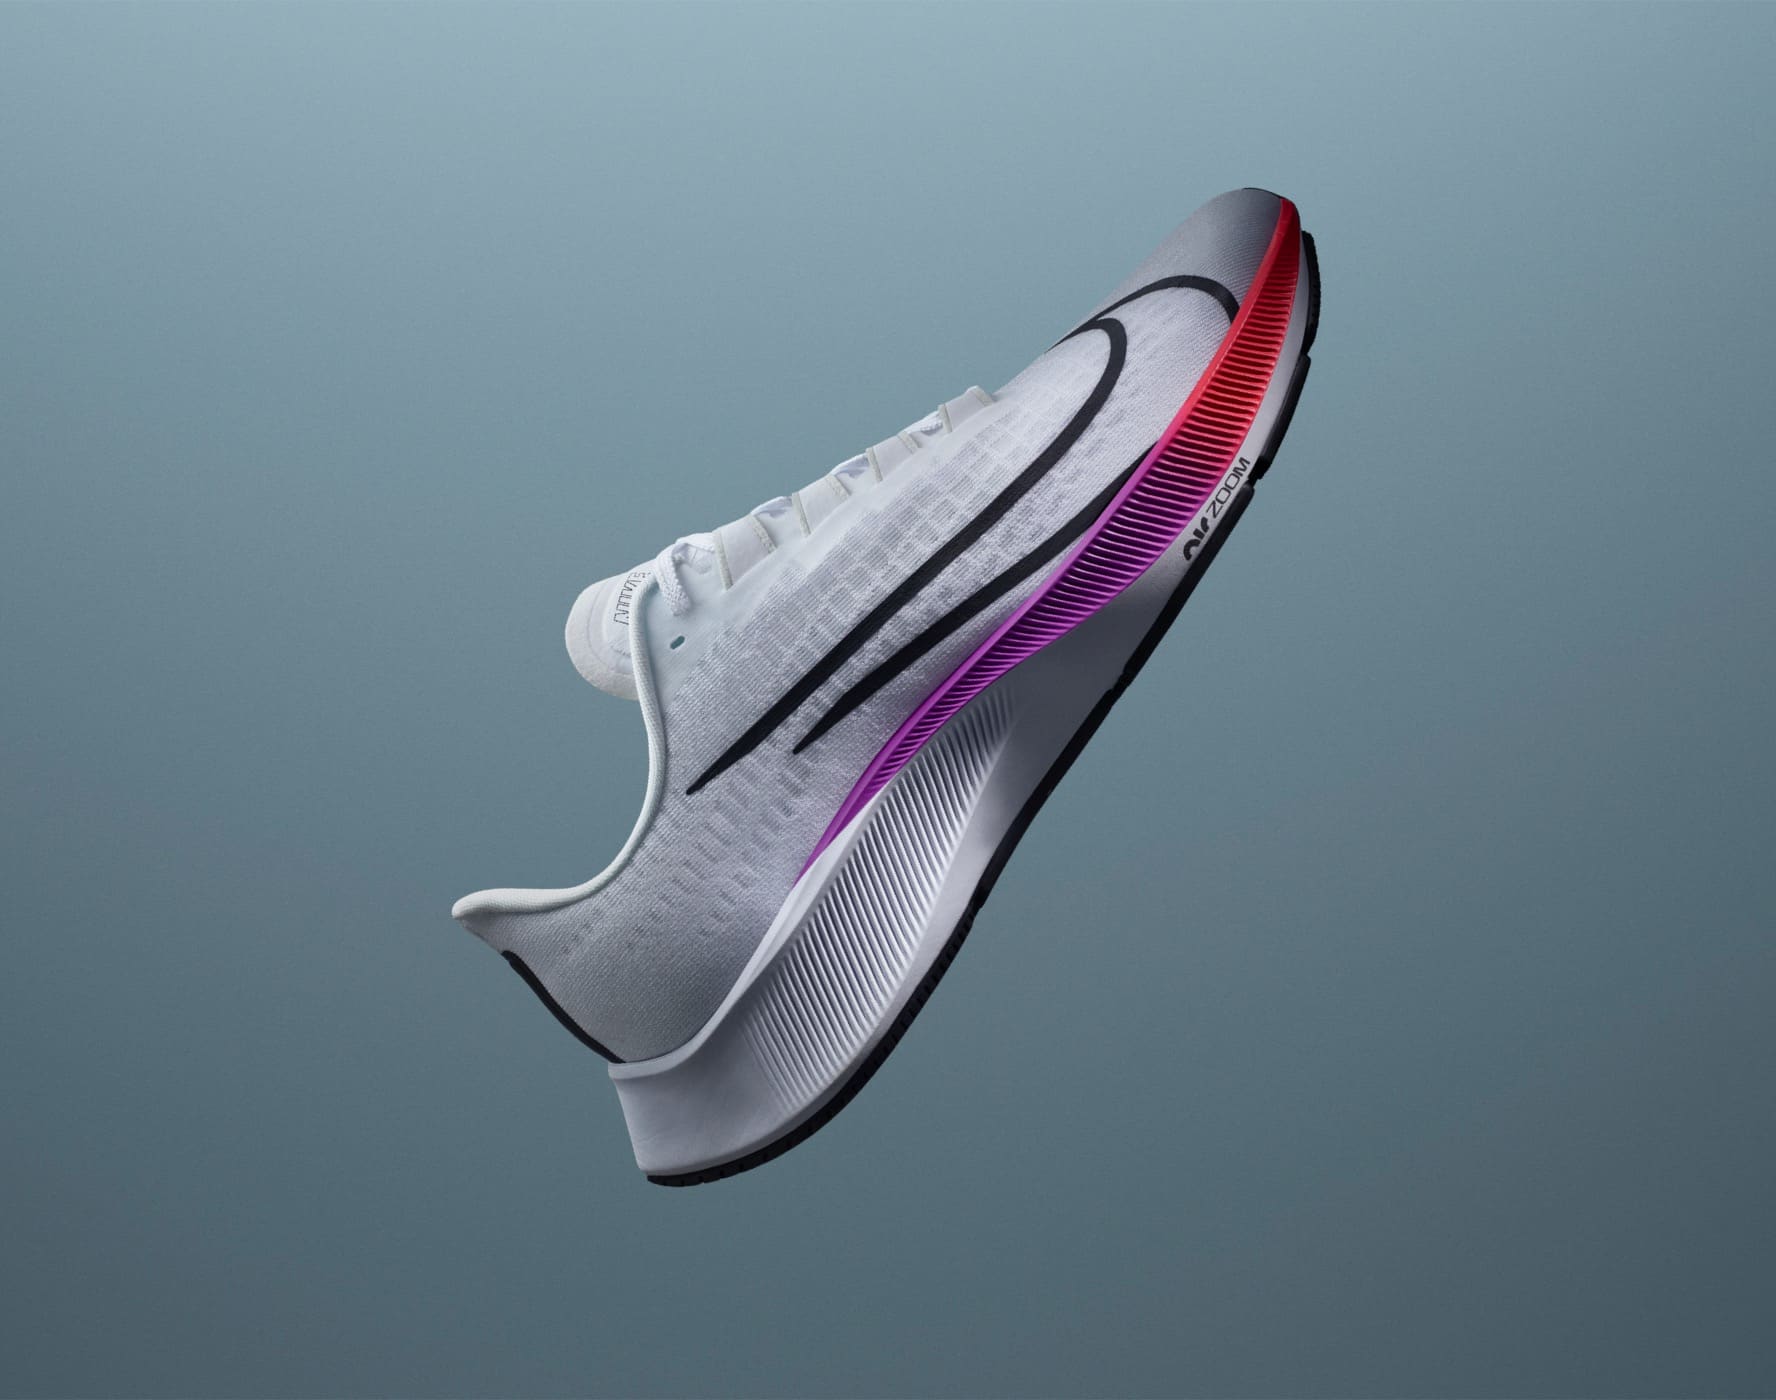 reservoir area Company Nike Vaporfly. Featuring the new Vaporfly NEXT%. Nike.com